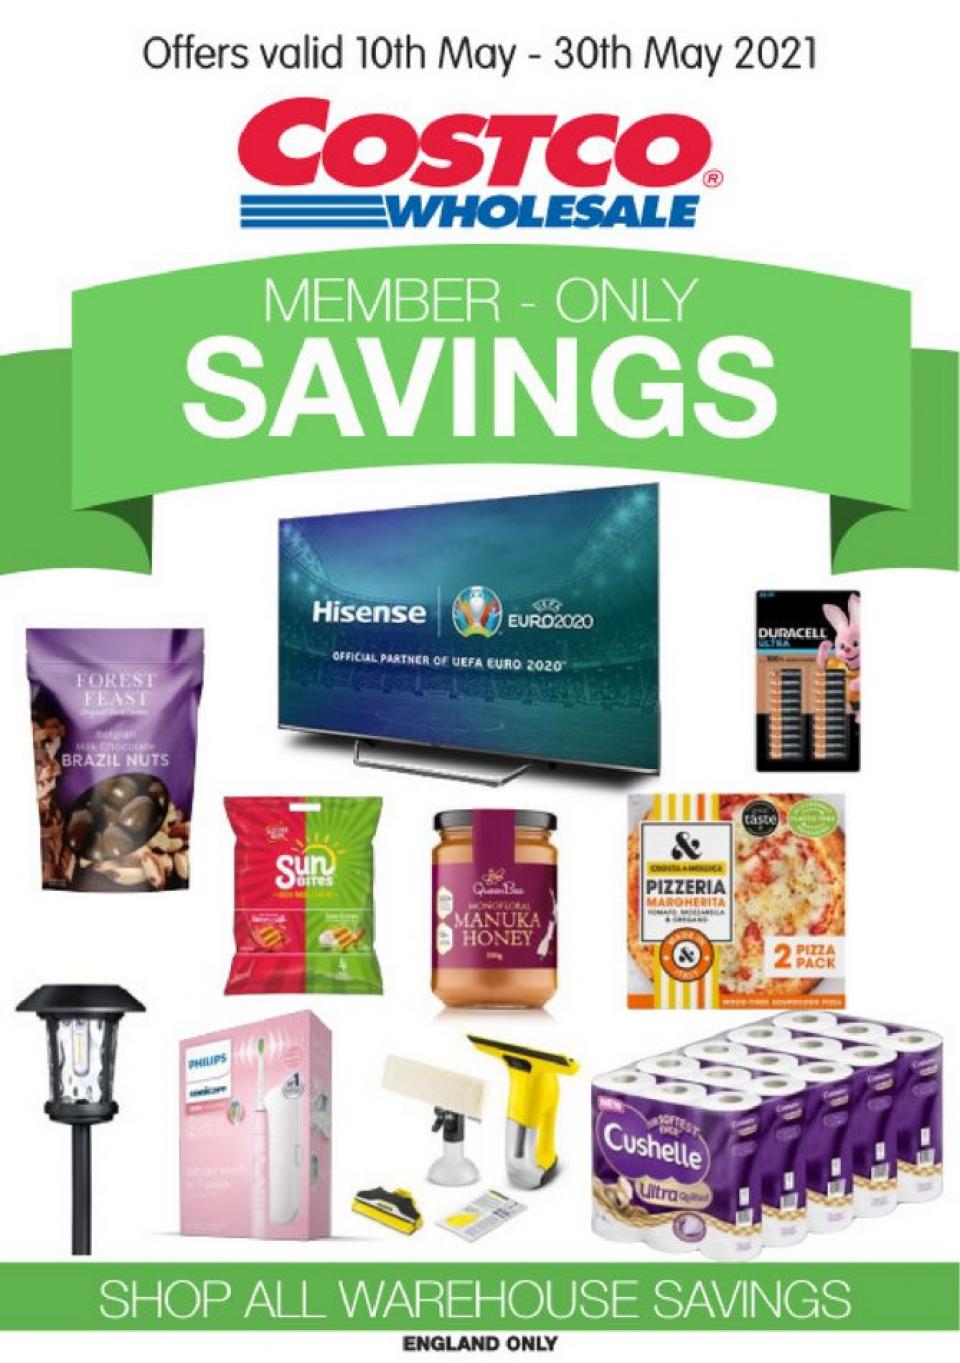 Costco Offers Member-Only-Savings 10 – 30 May 2021